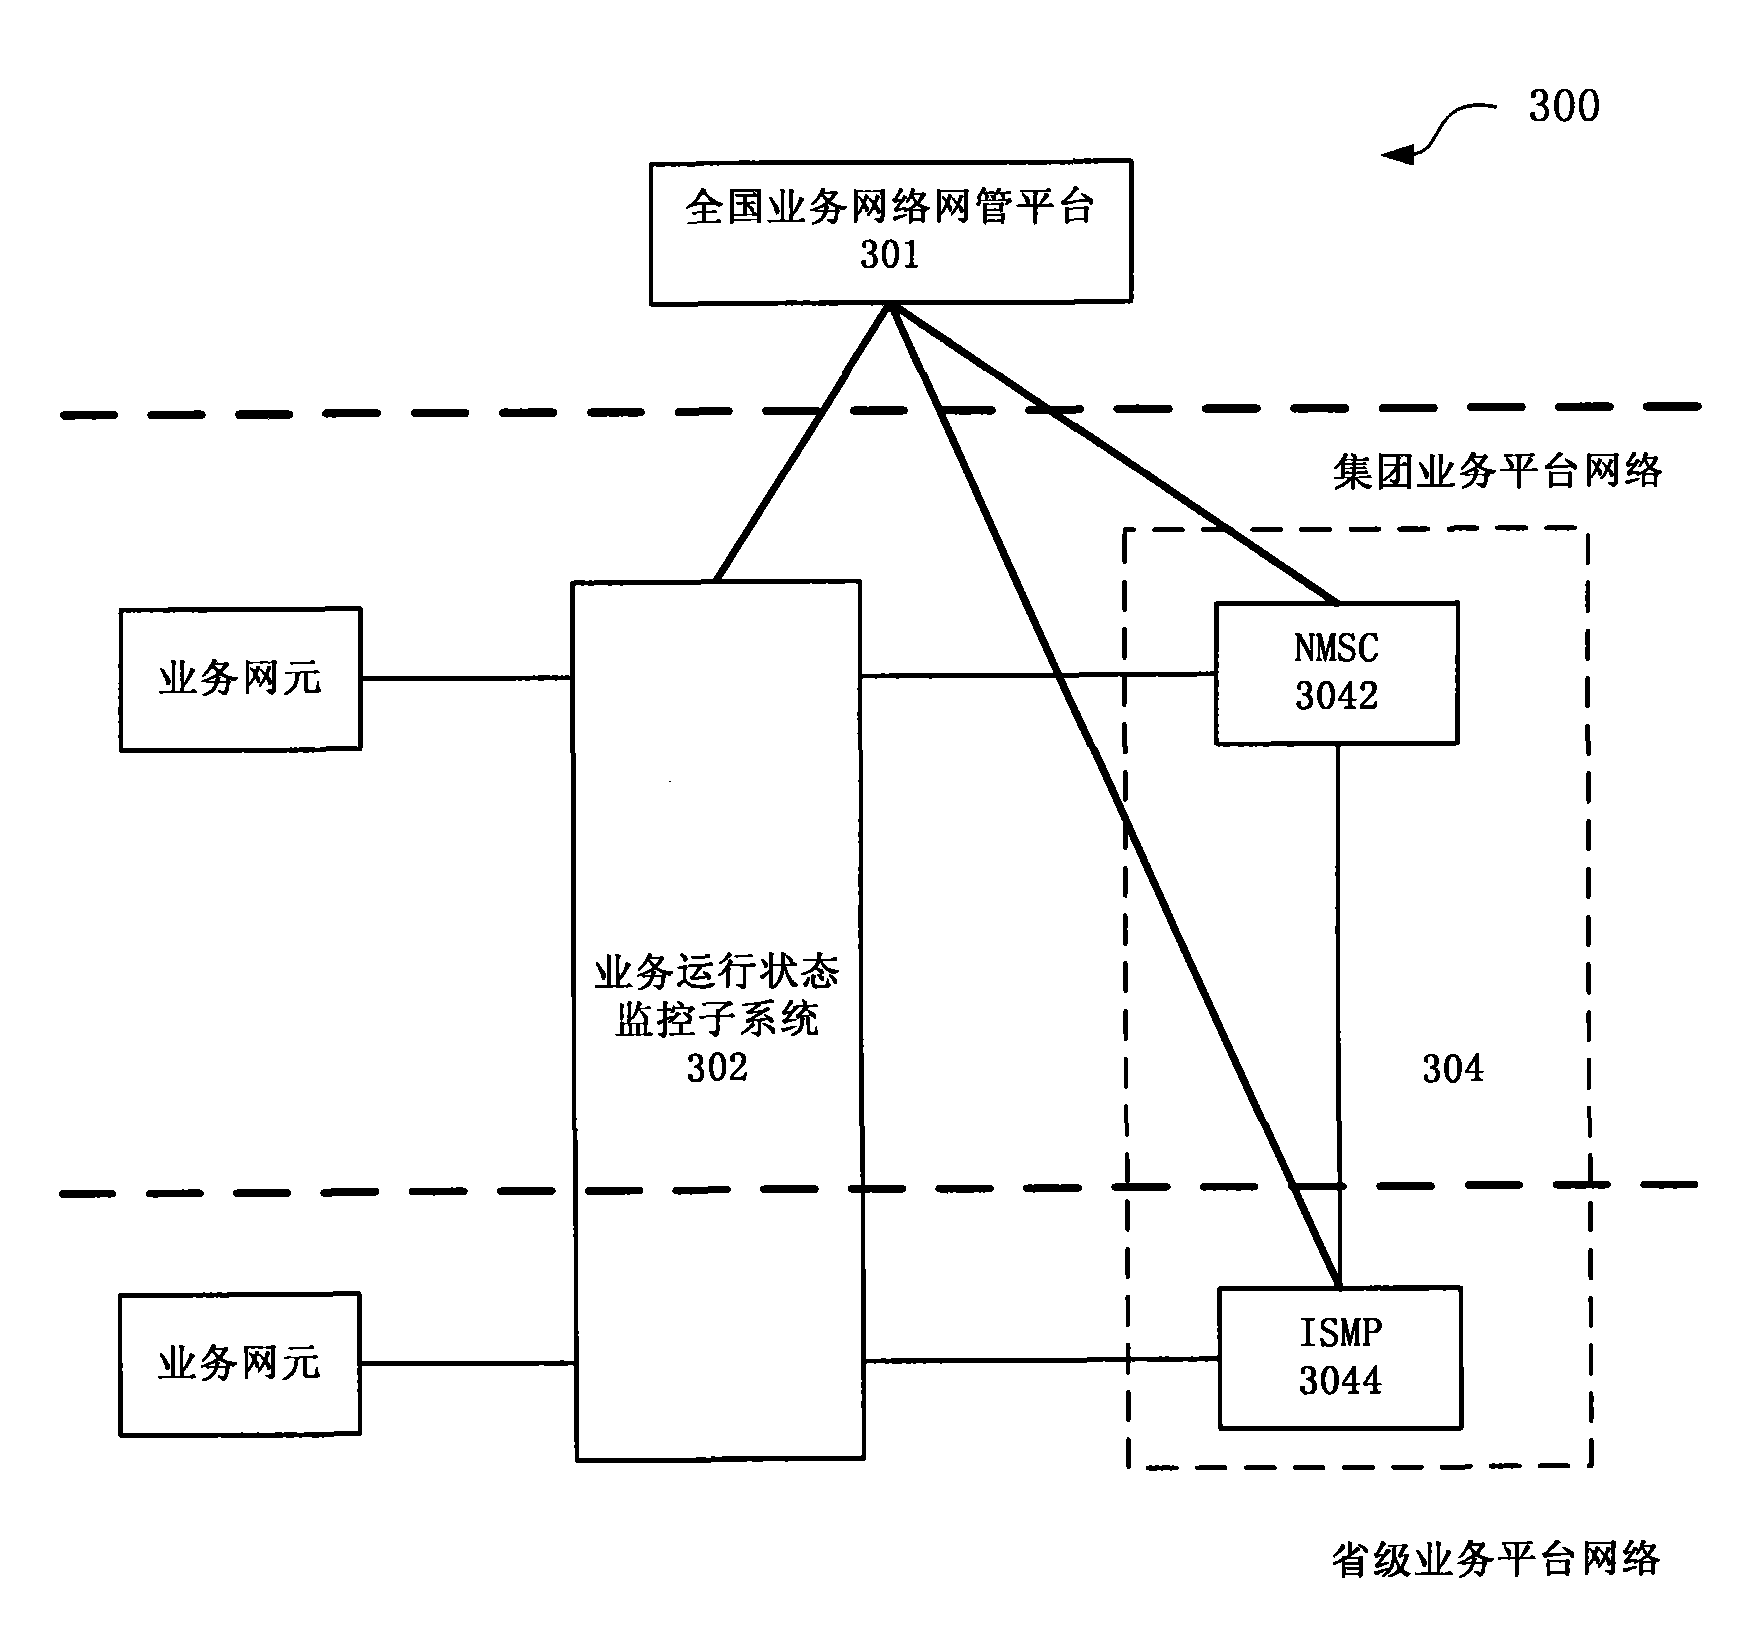 Network service monitoring system, and network service synchronization and running state monitoring methods